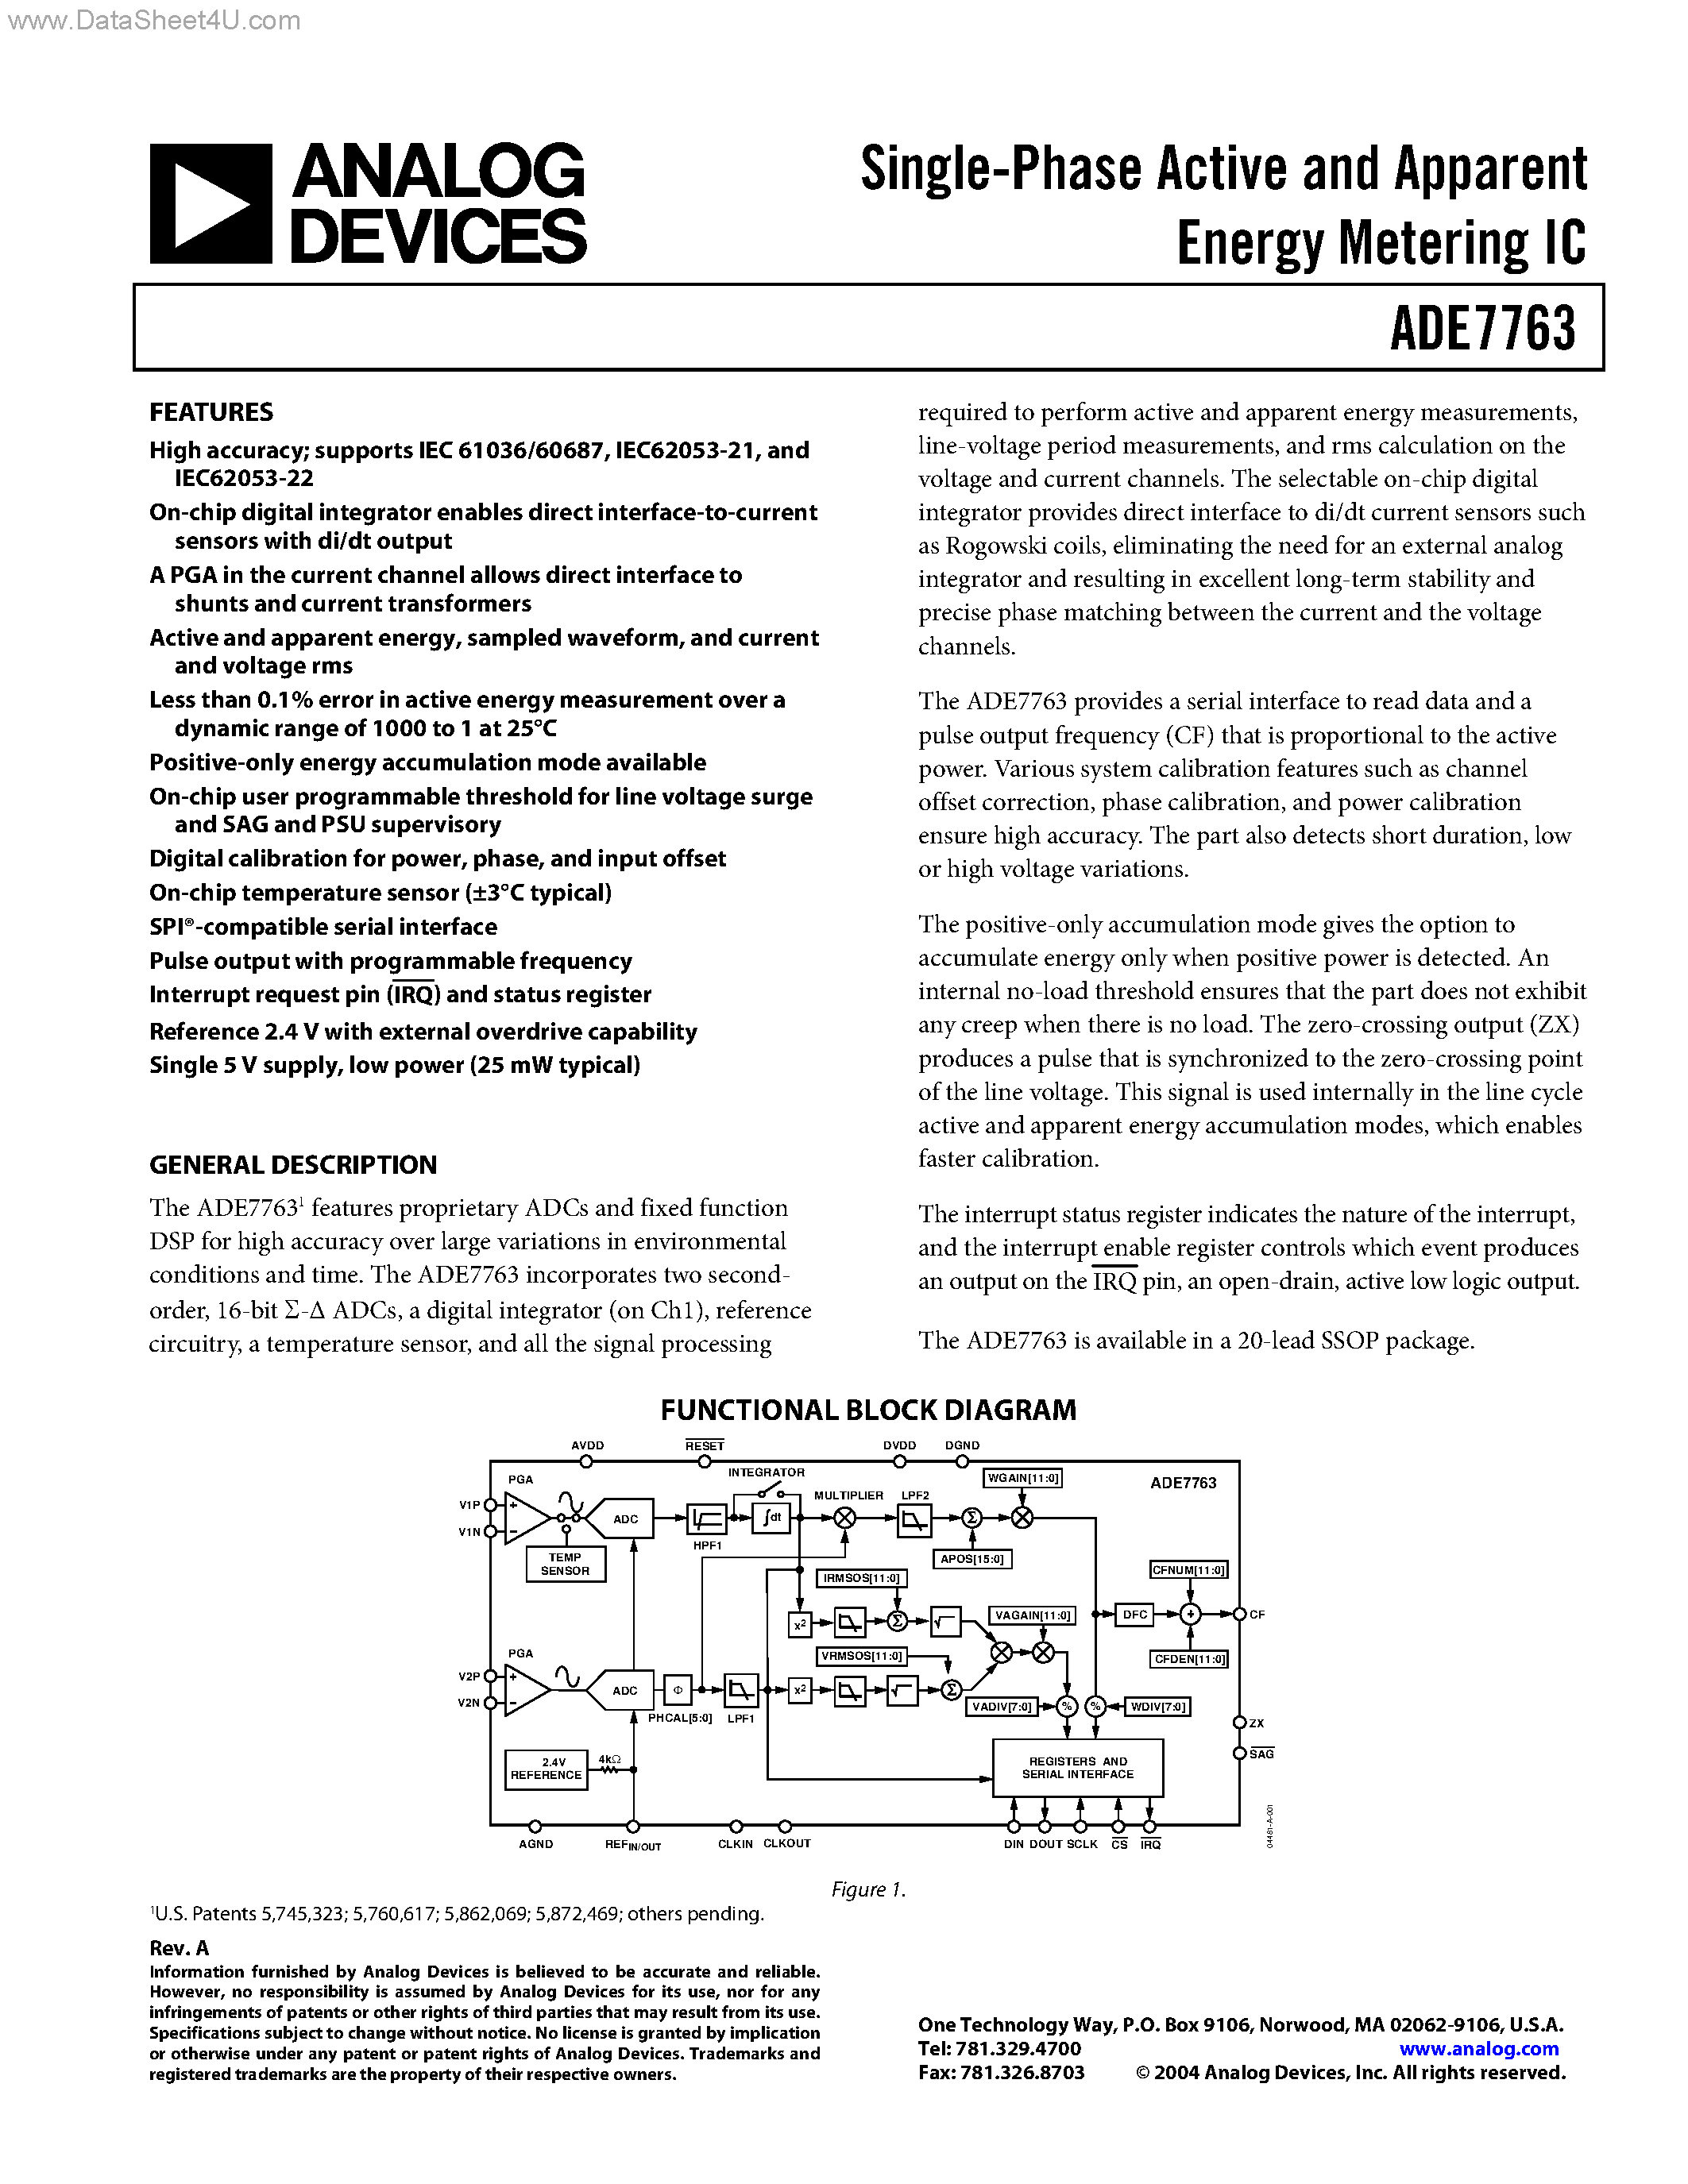 Даташит ADE7763 - Single-Phase Active and Apparent Energy Metering IC страница 1